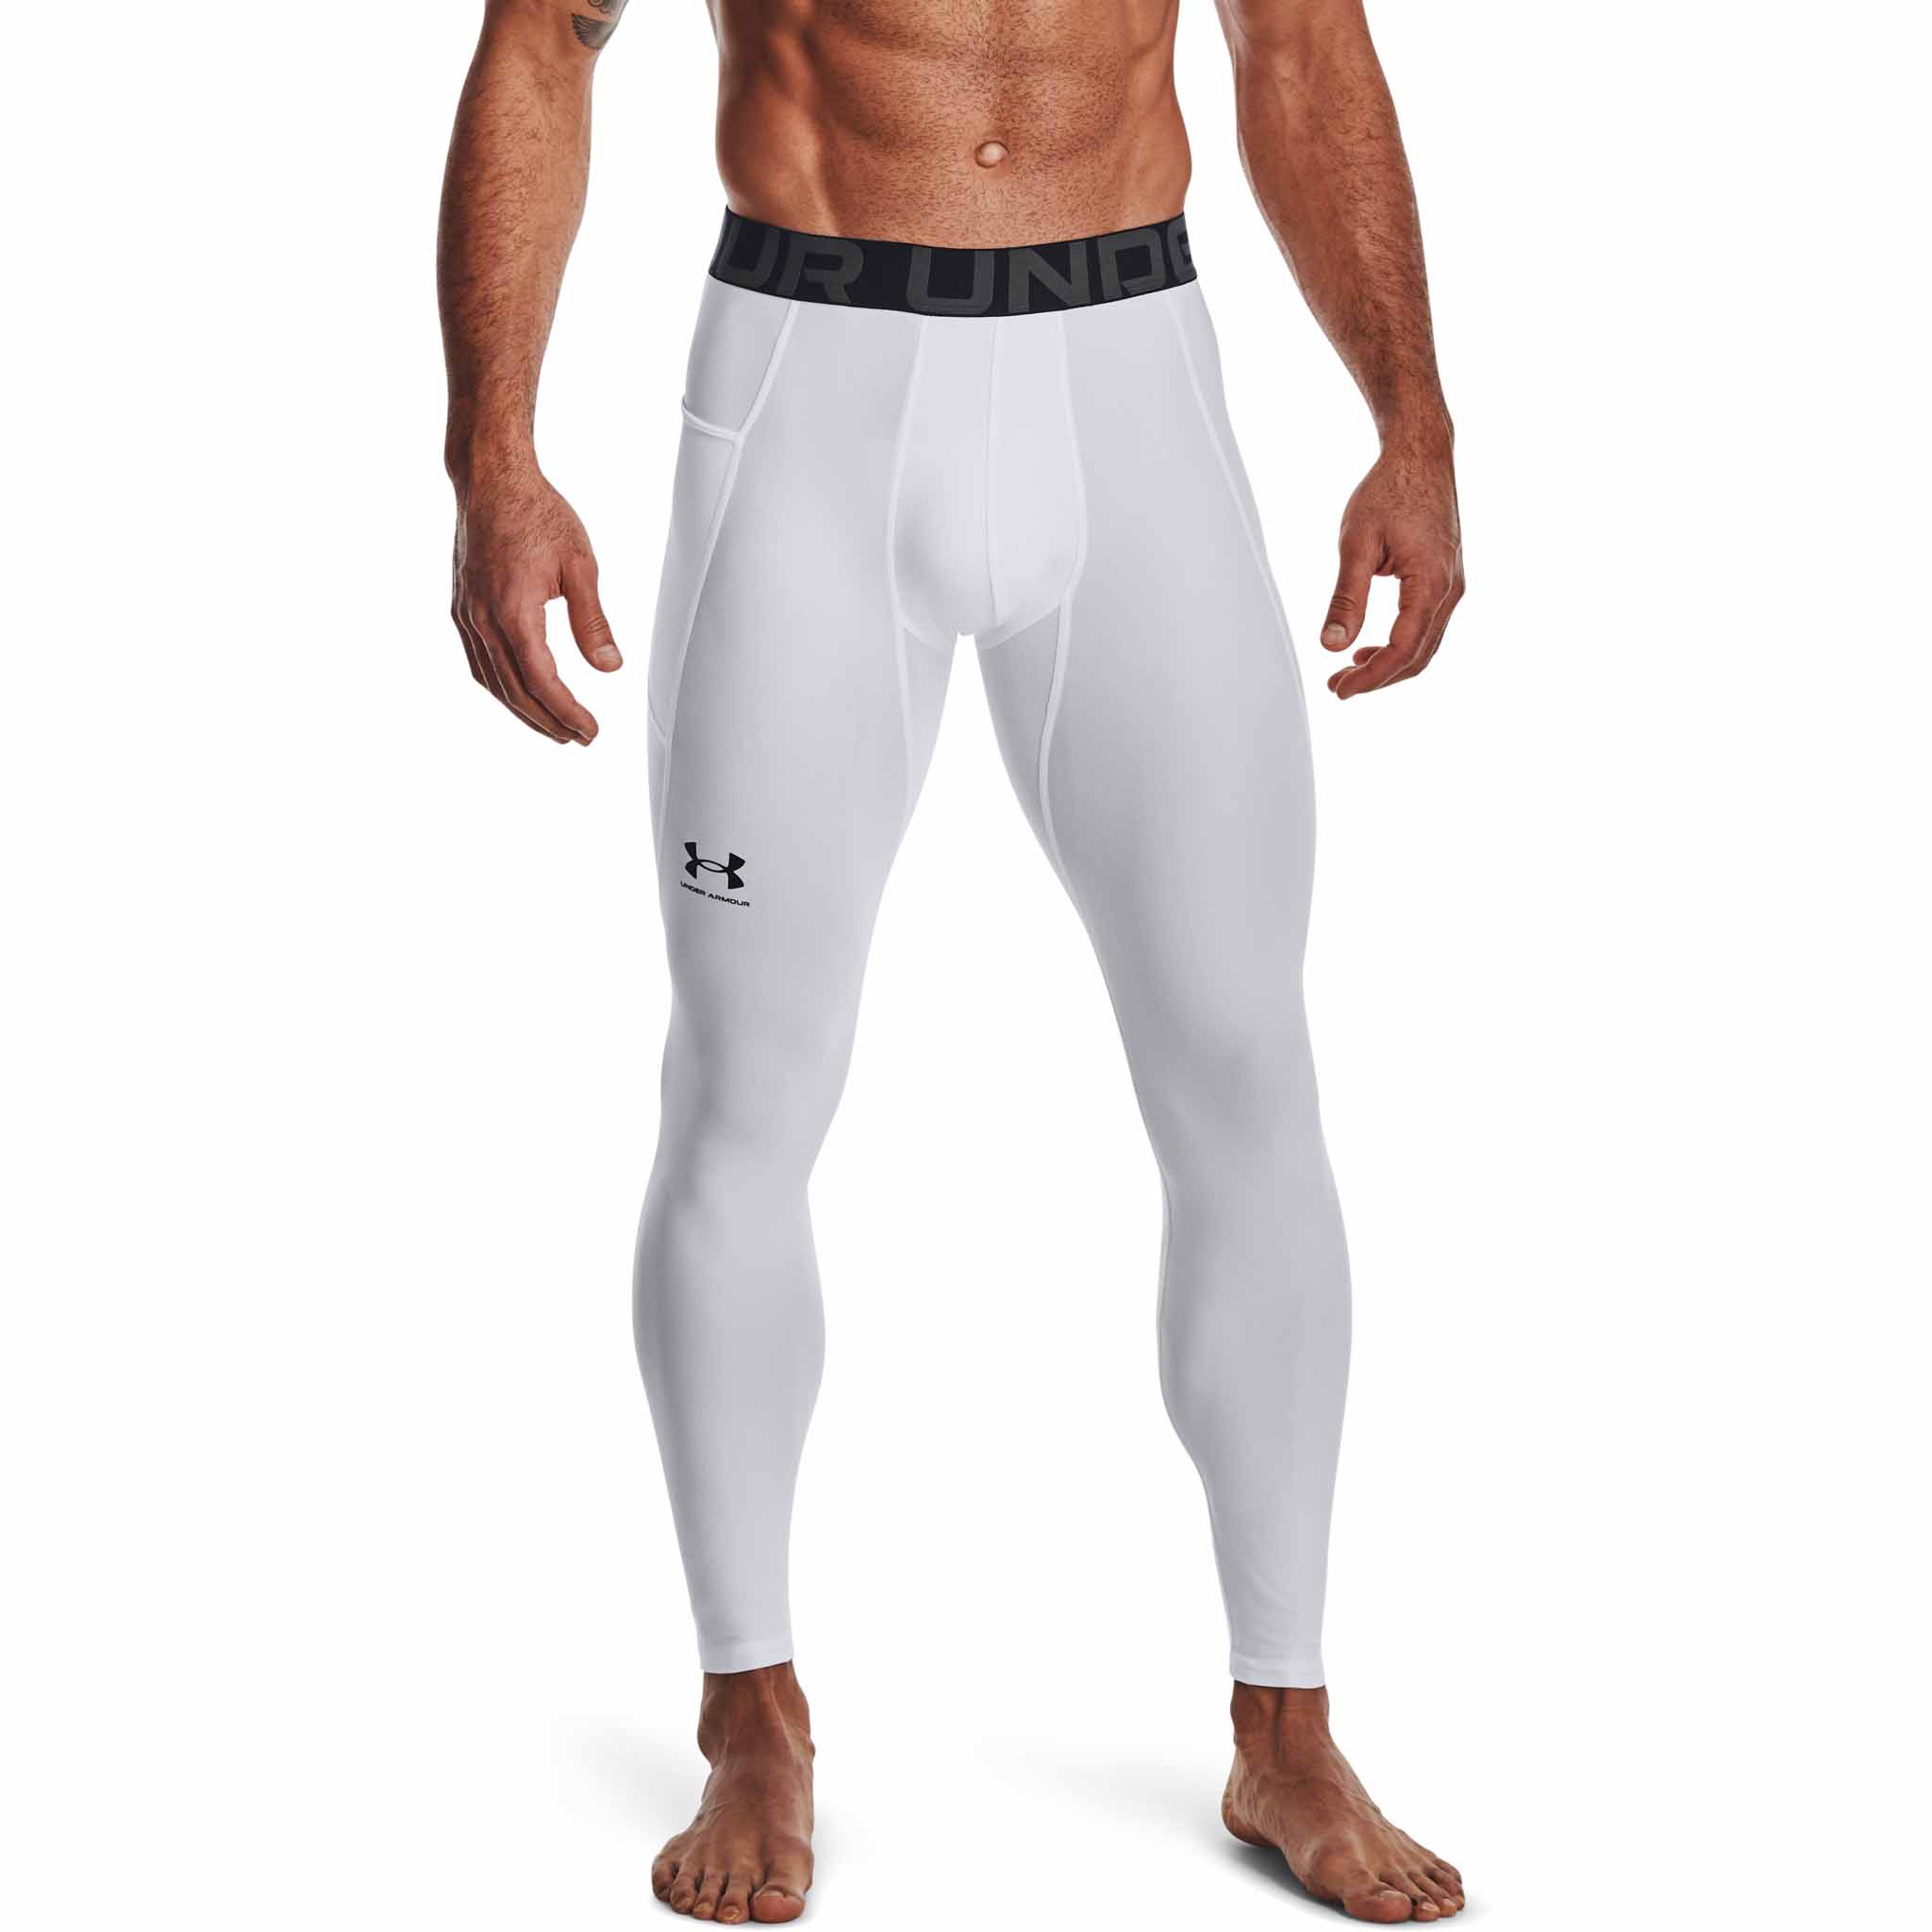 Under Armour, Leggings, Performance Tights